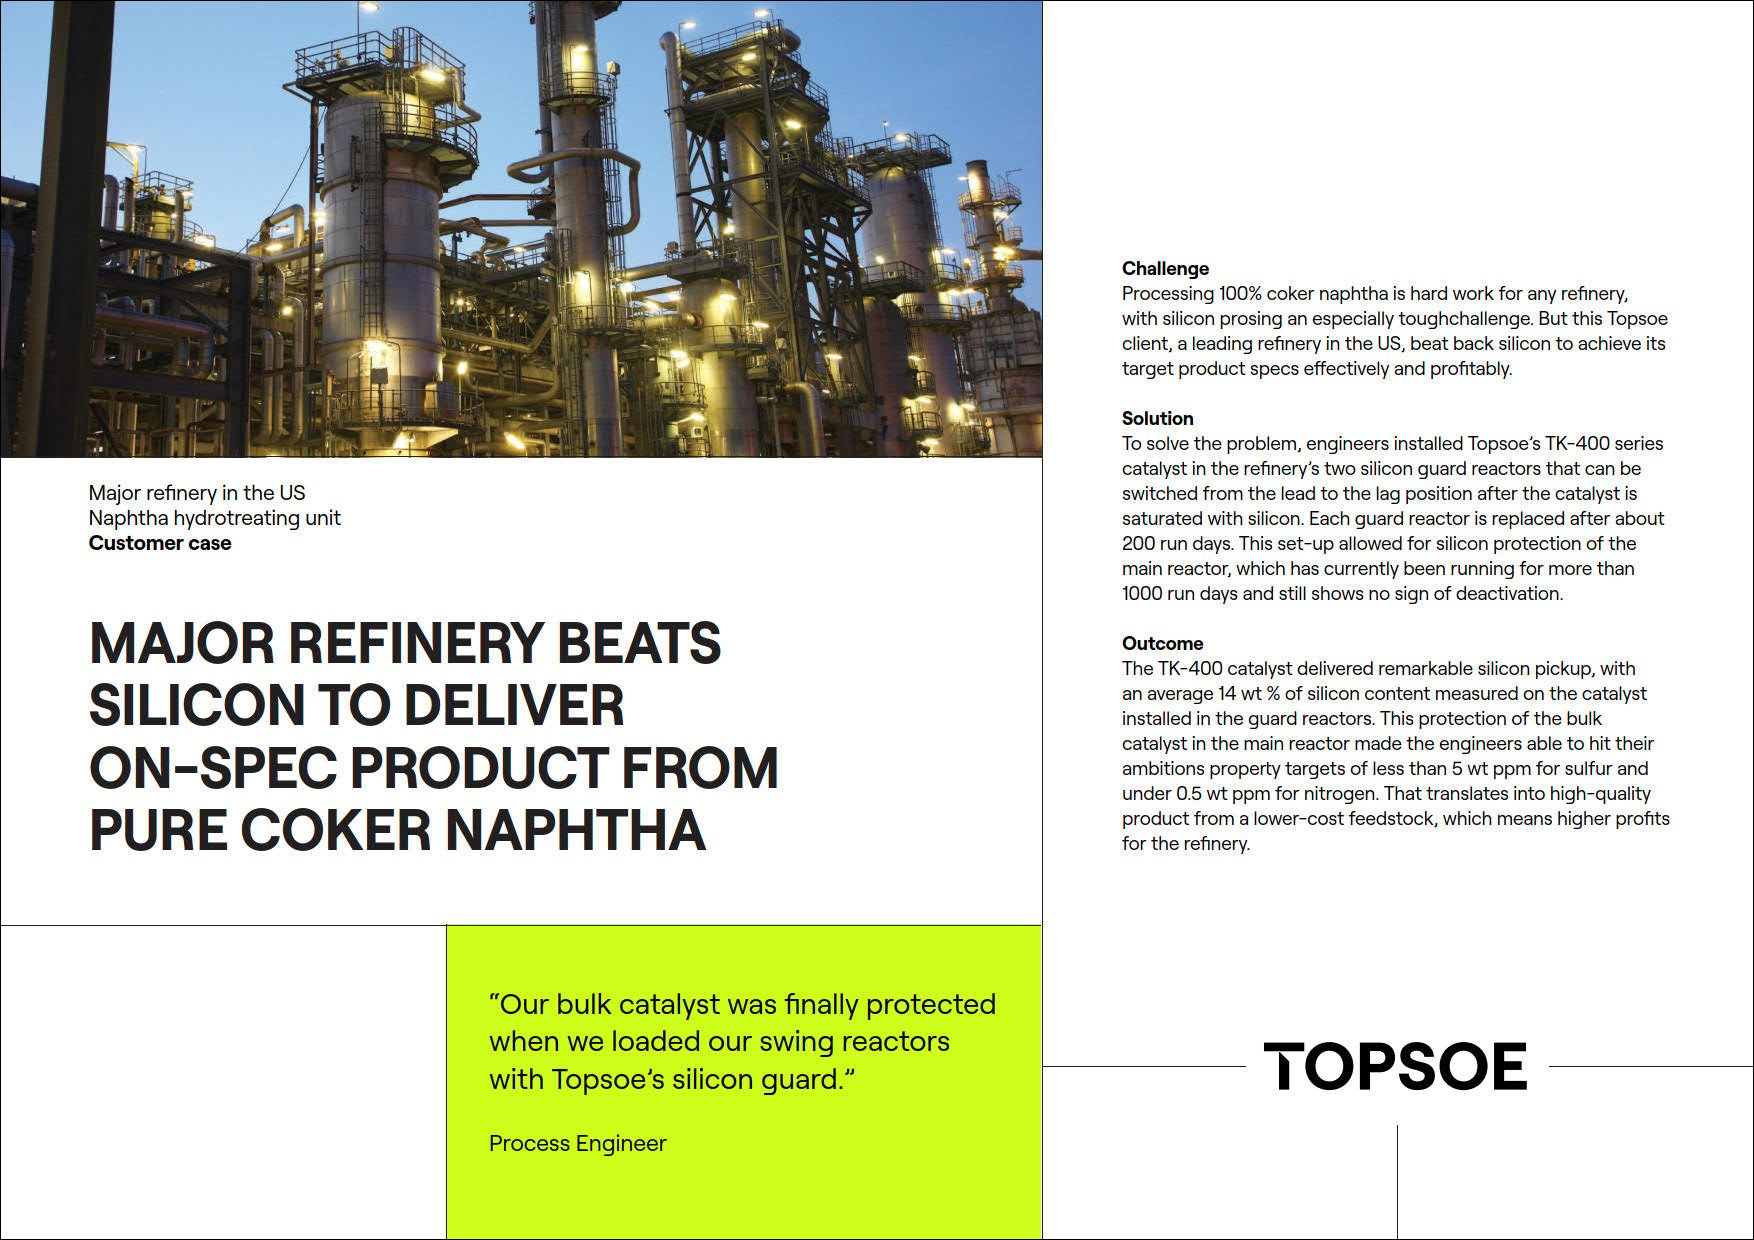 Major refinery beats silicon to deliver on-spec product from pure coker naphtha